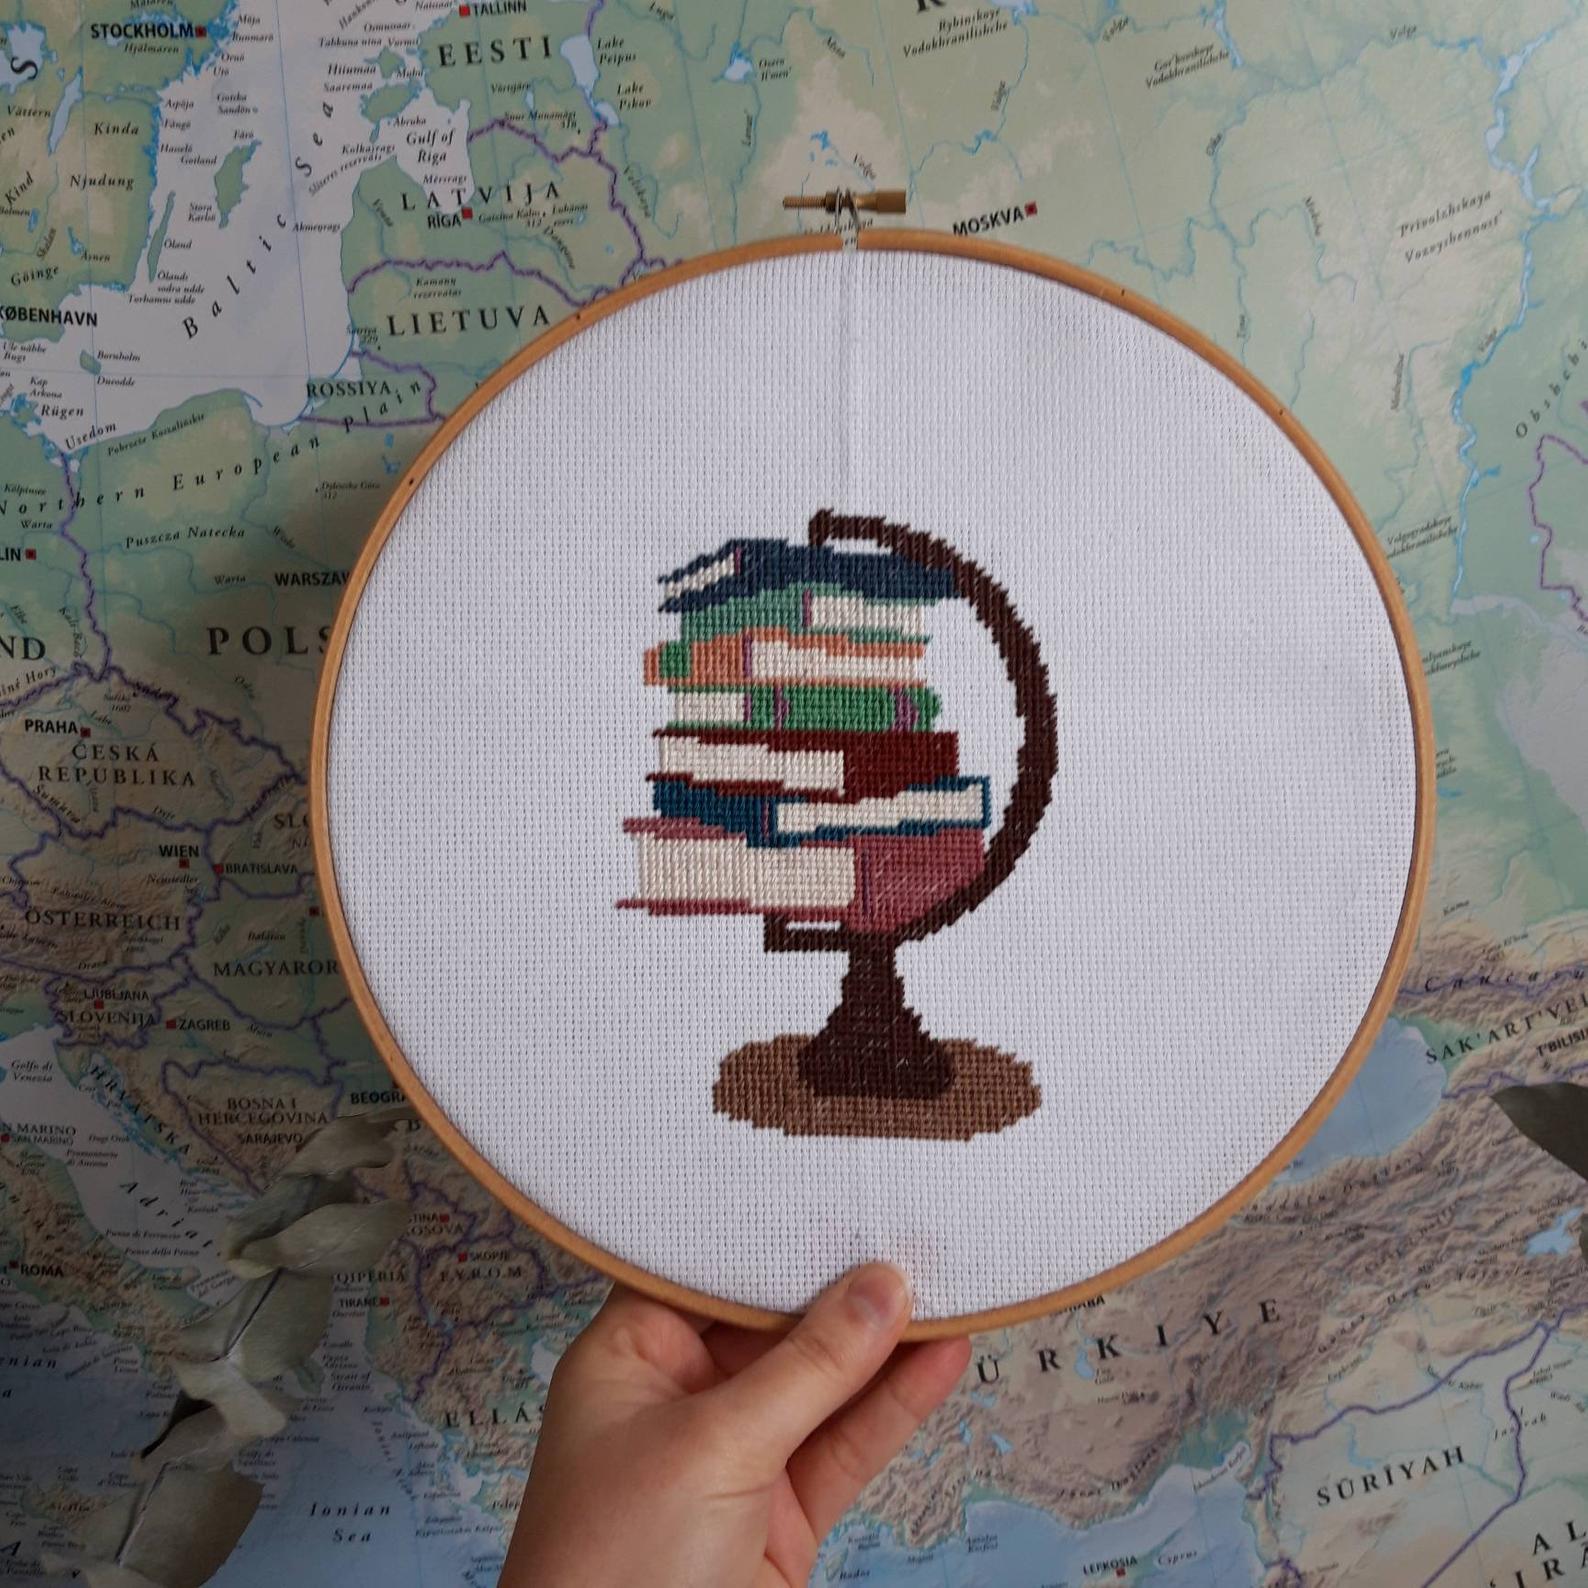 More Awesome Literary Embroidery, blog post by Aspasia S. Bissas, needlepoint, embroidery, cross-stitch, cross stitch, crossstitch, patterns, free patterns, books, reading, bookish, literary, aspasiasbissas.com, books are my world, etsy, pattern download